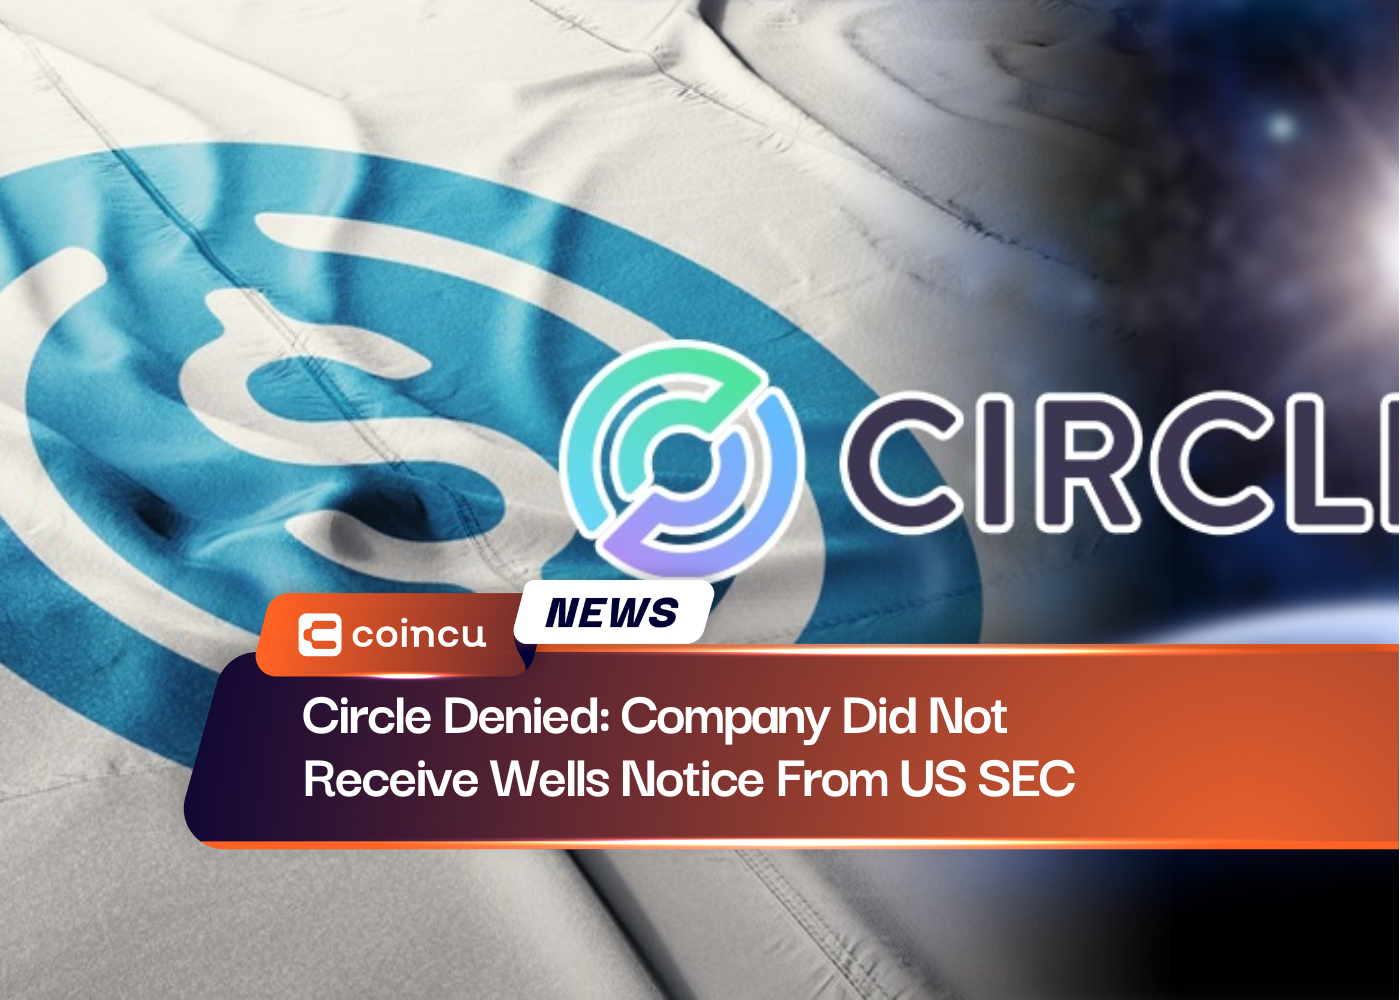 Circle Denied: Company Did Not Receive Wells Notice From US SEC